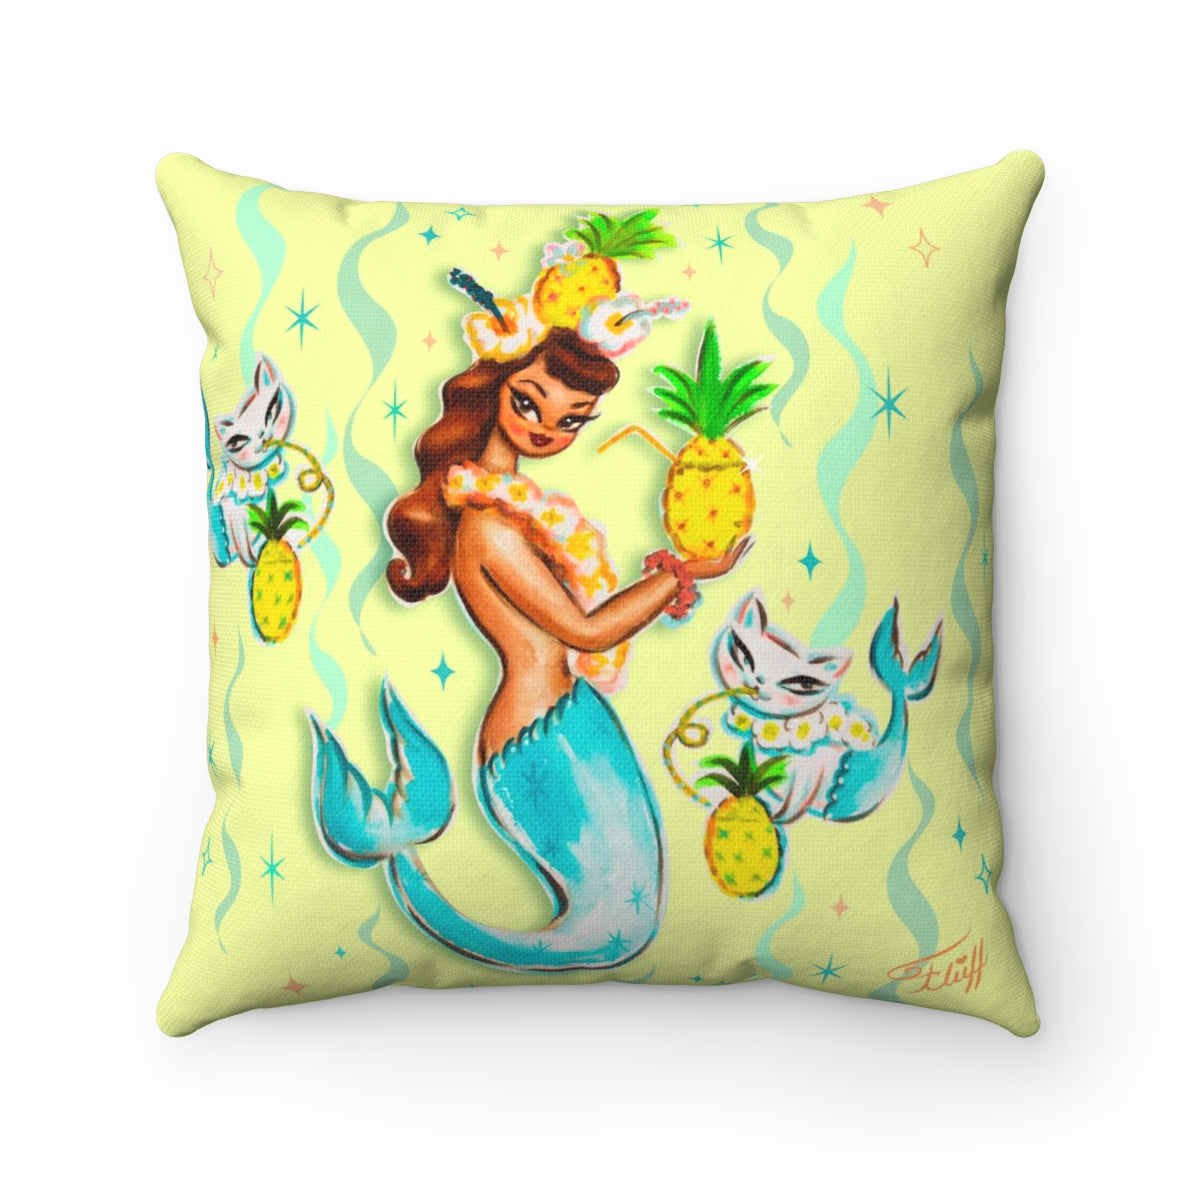 Tropical Pineapple Mermaid with Merkittens • Square Pillow